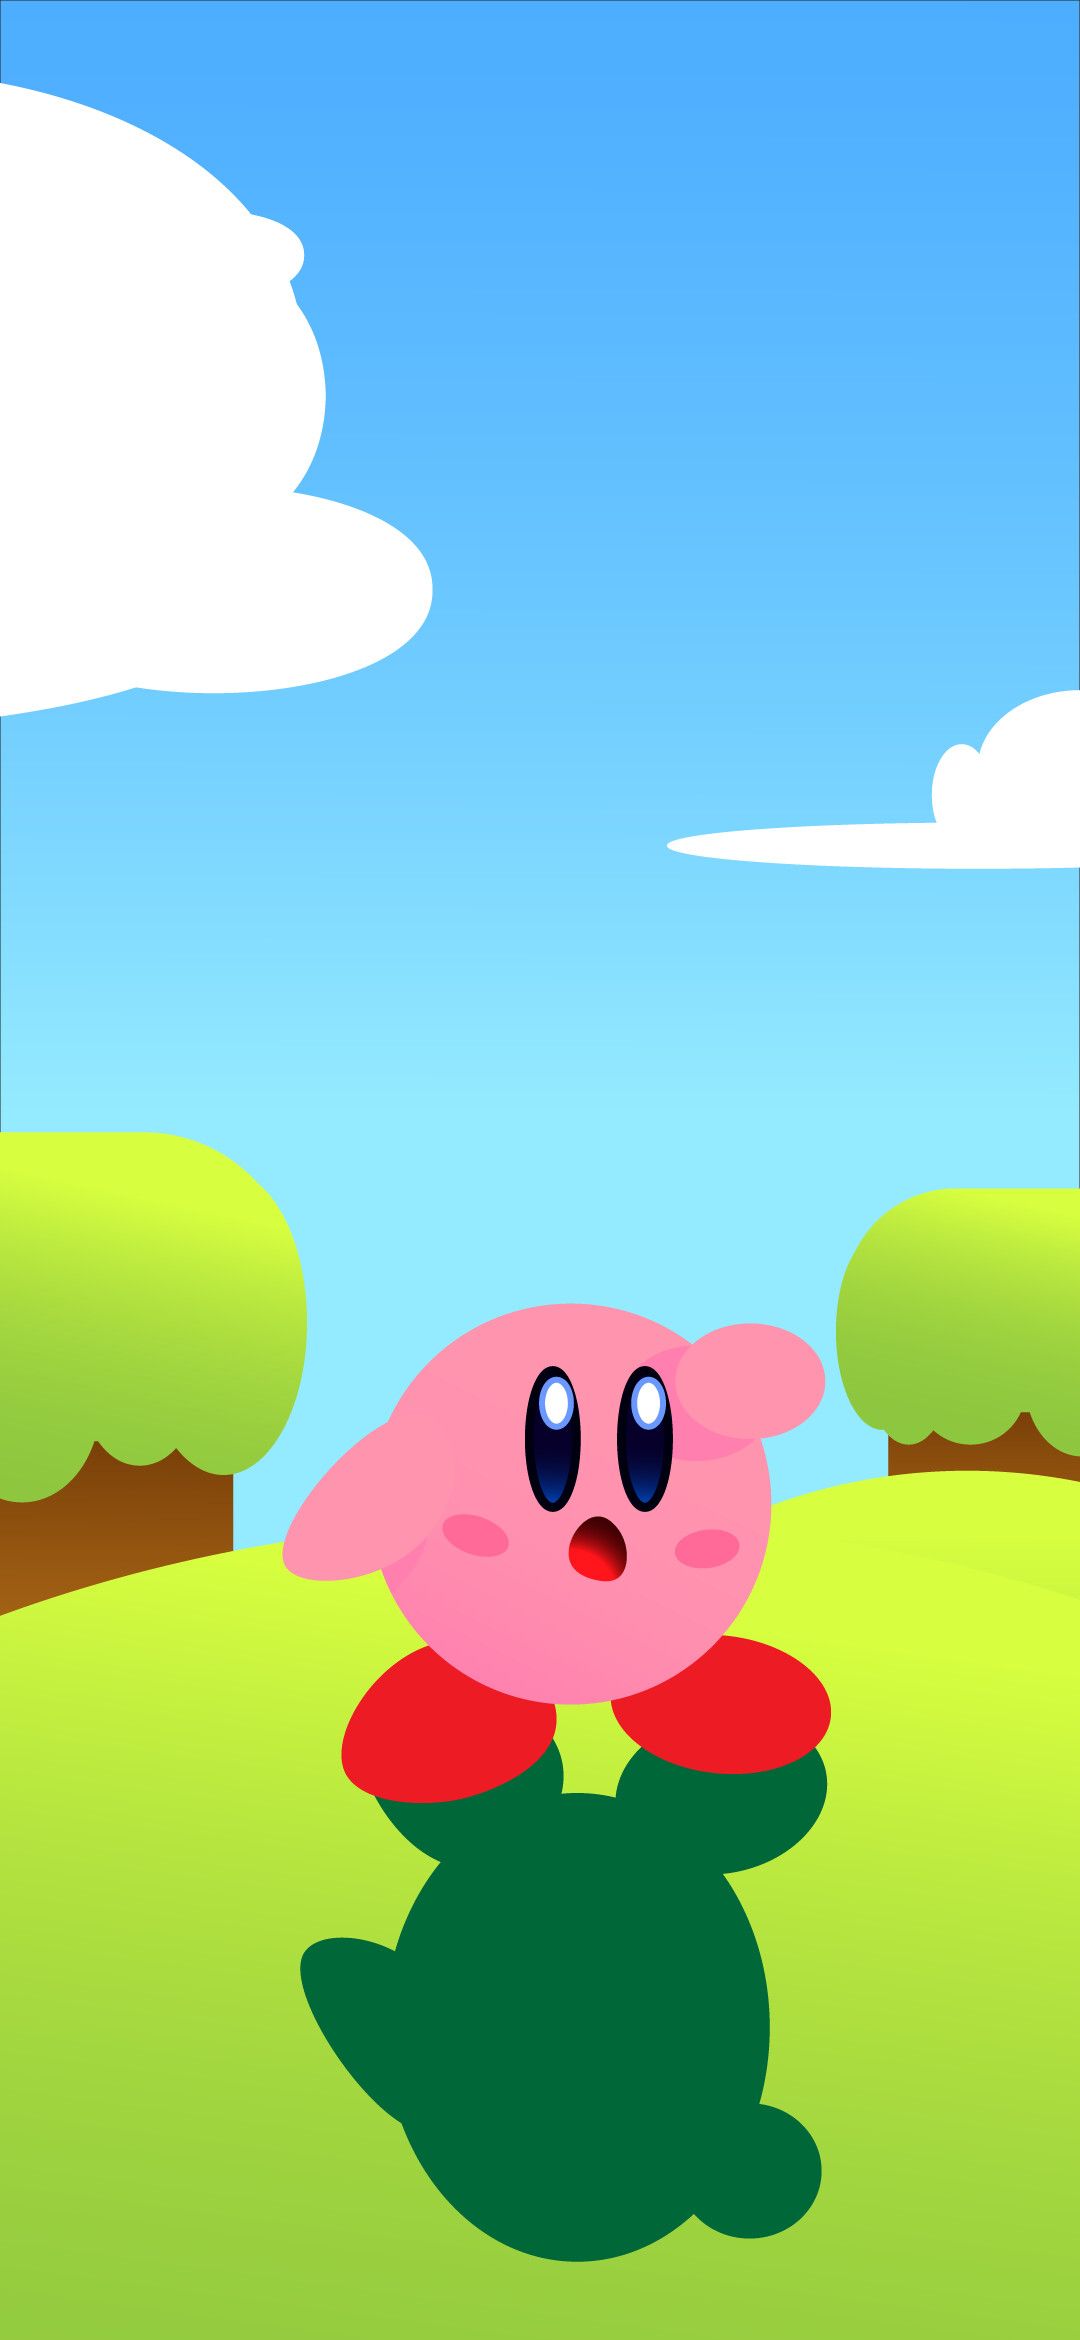 Kirby on a hill - Kirby